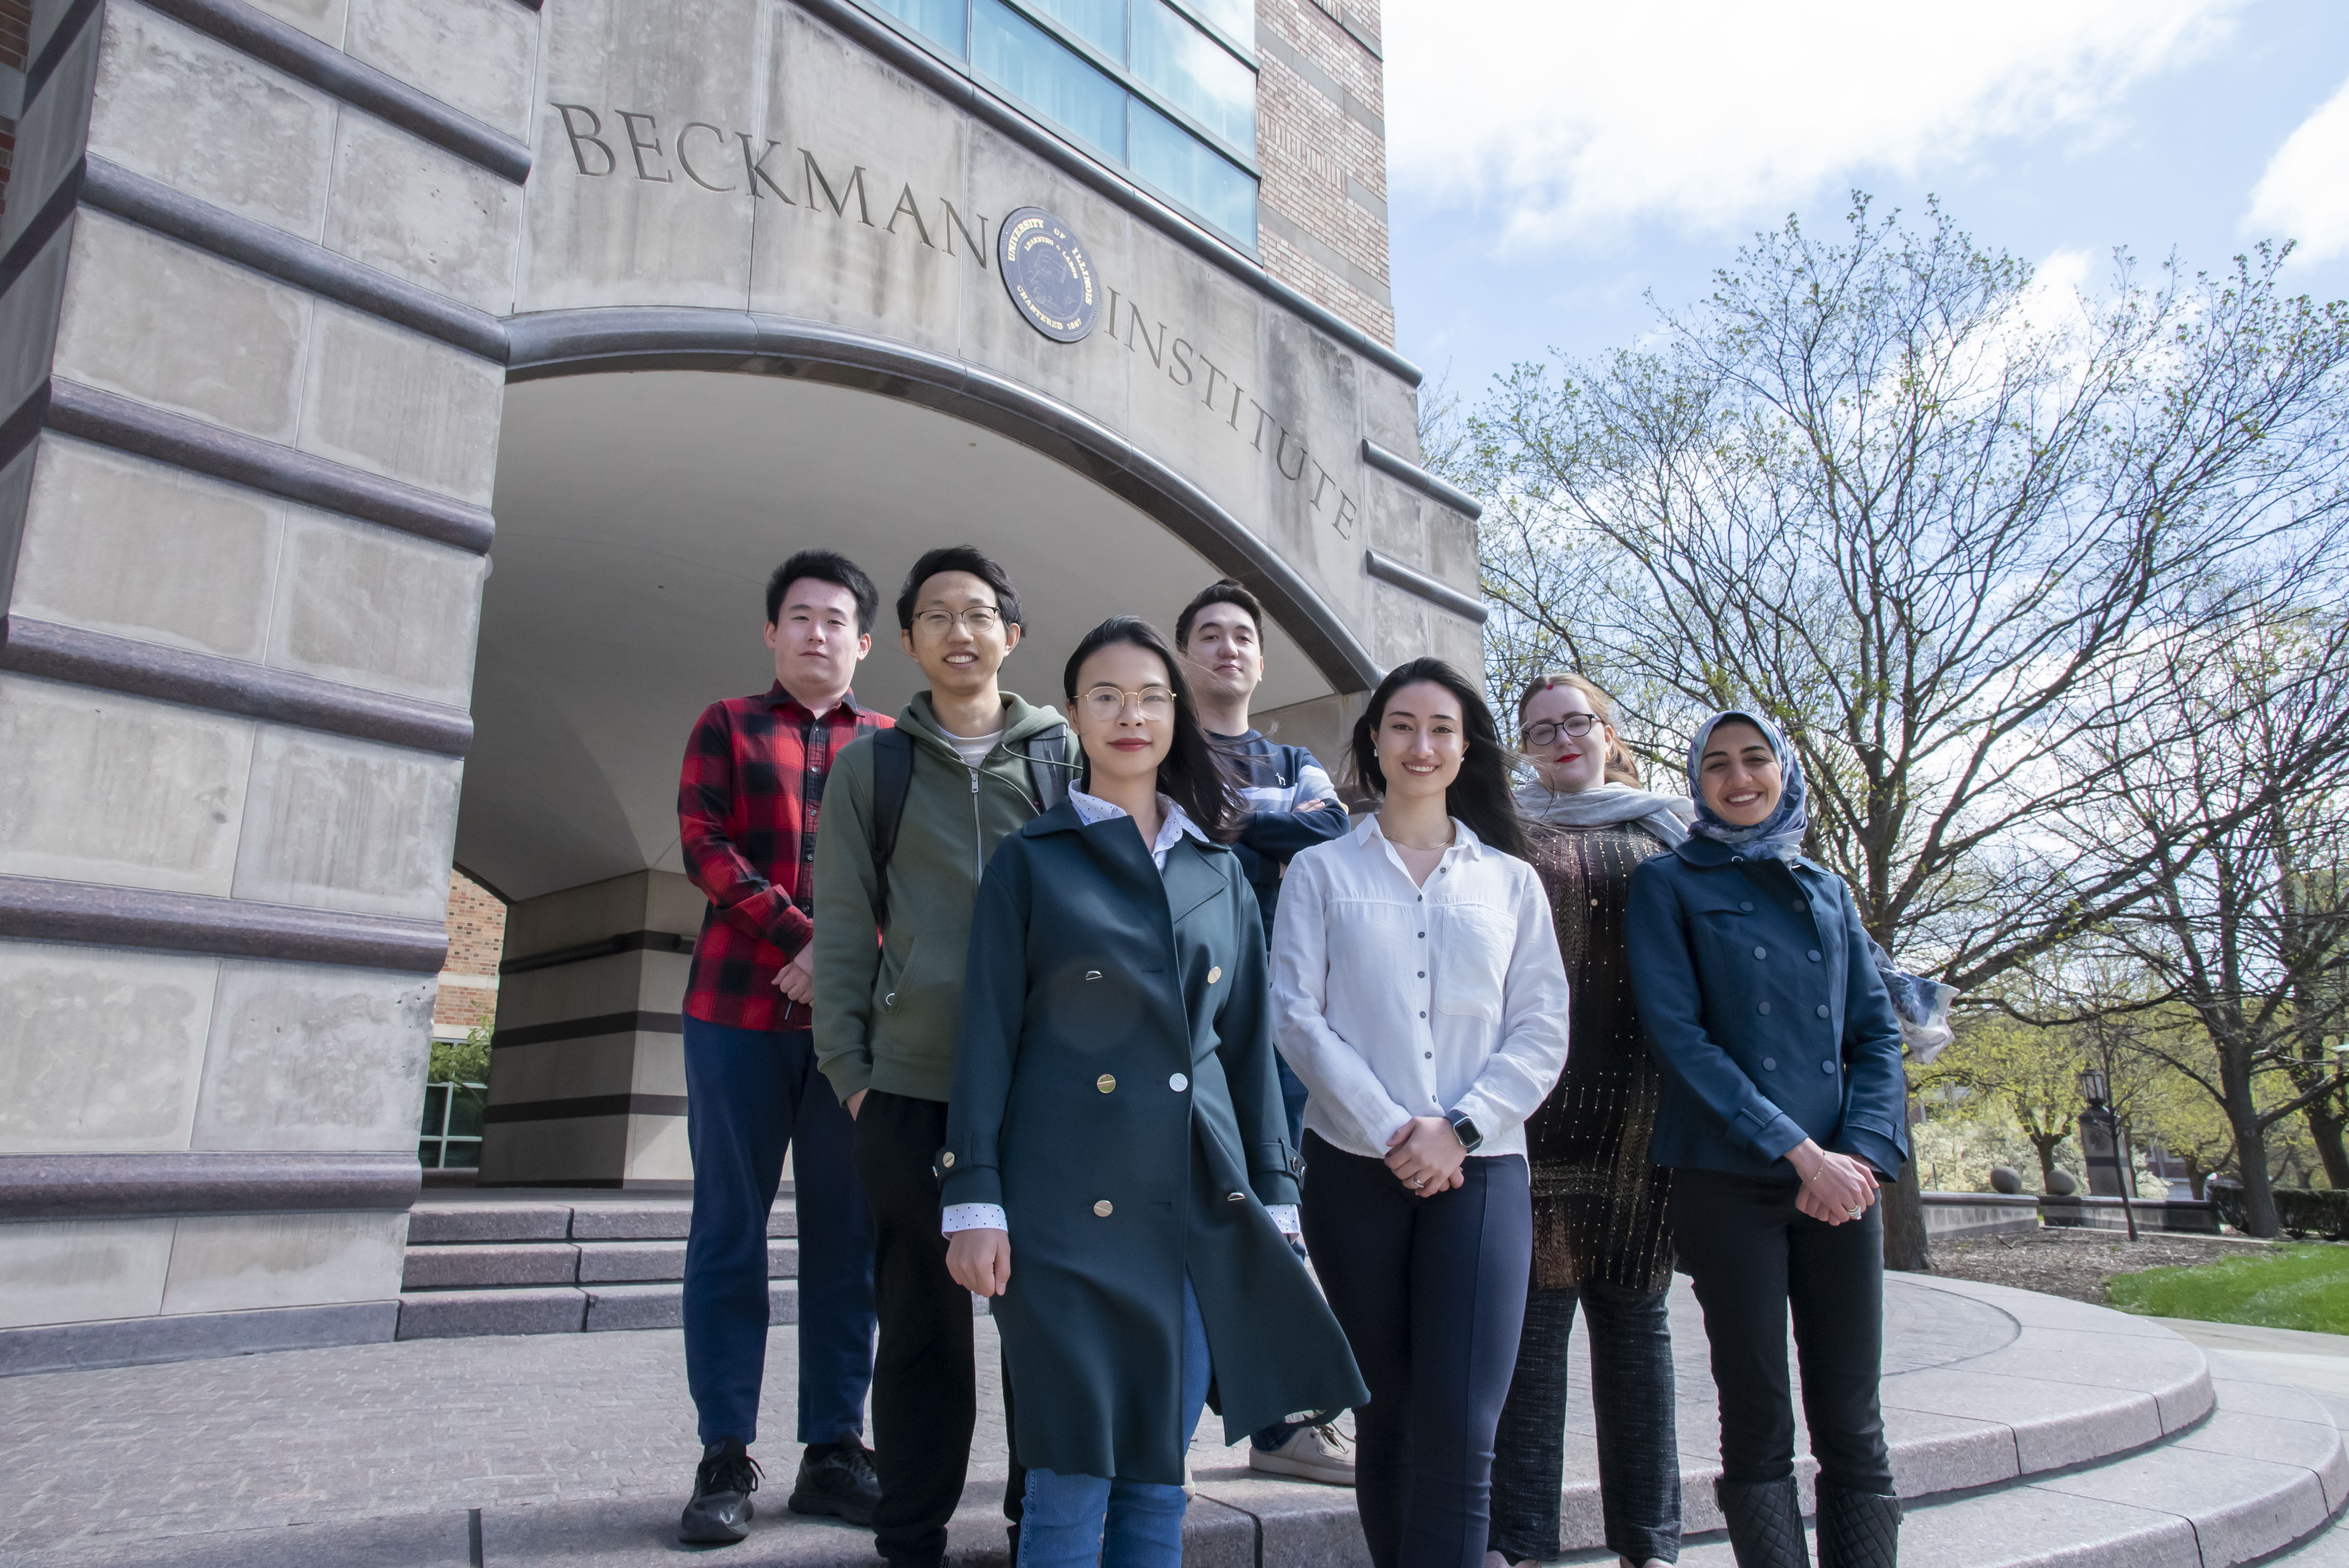 The 2022 Beckman Institute Graduate Fellows stand in a group outside the Beckman Institute.